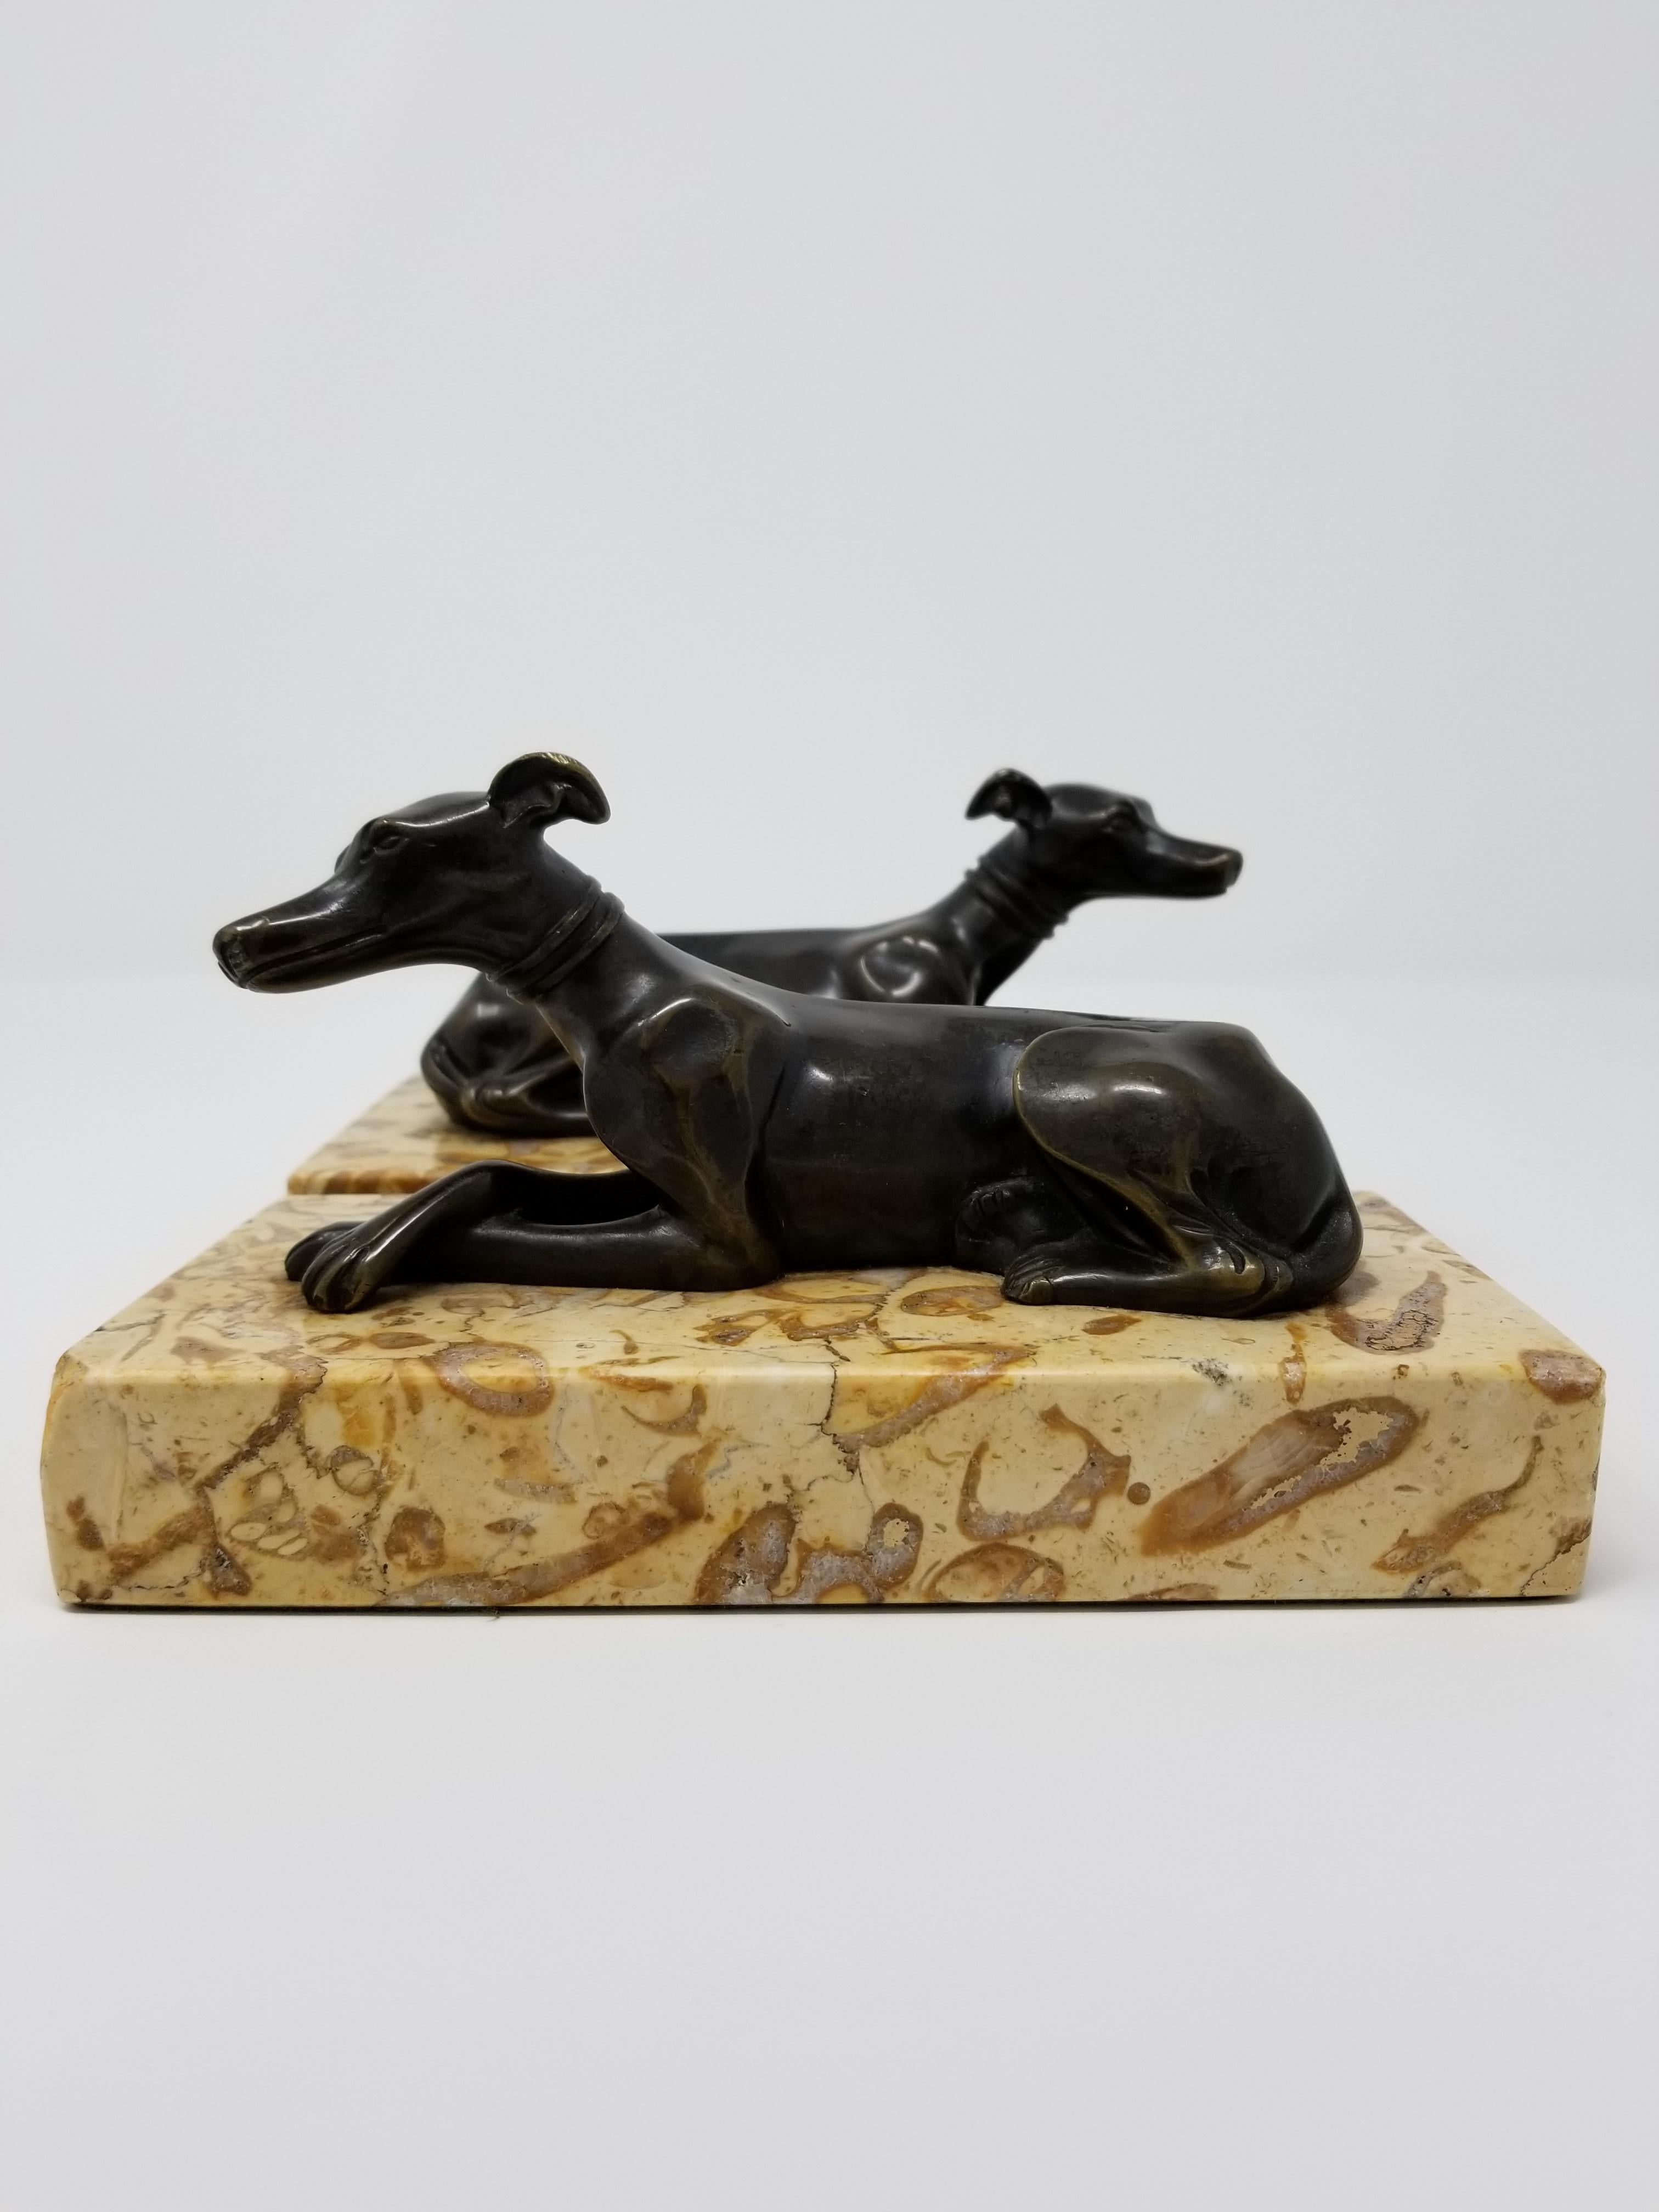 A Beautiful Pair of 19th Century Antique Grand Tour Patinated Bronze Grey Hounds Seated on Marble Plinths. Each dog is beautifully cast and hand-chiseled with meticulous craftsmanship. Each dog is further decorated in a beautiful brown patina, with